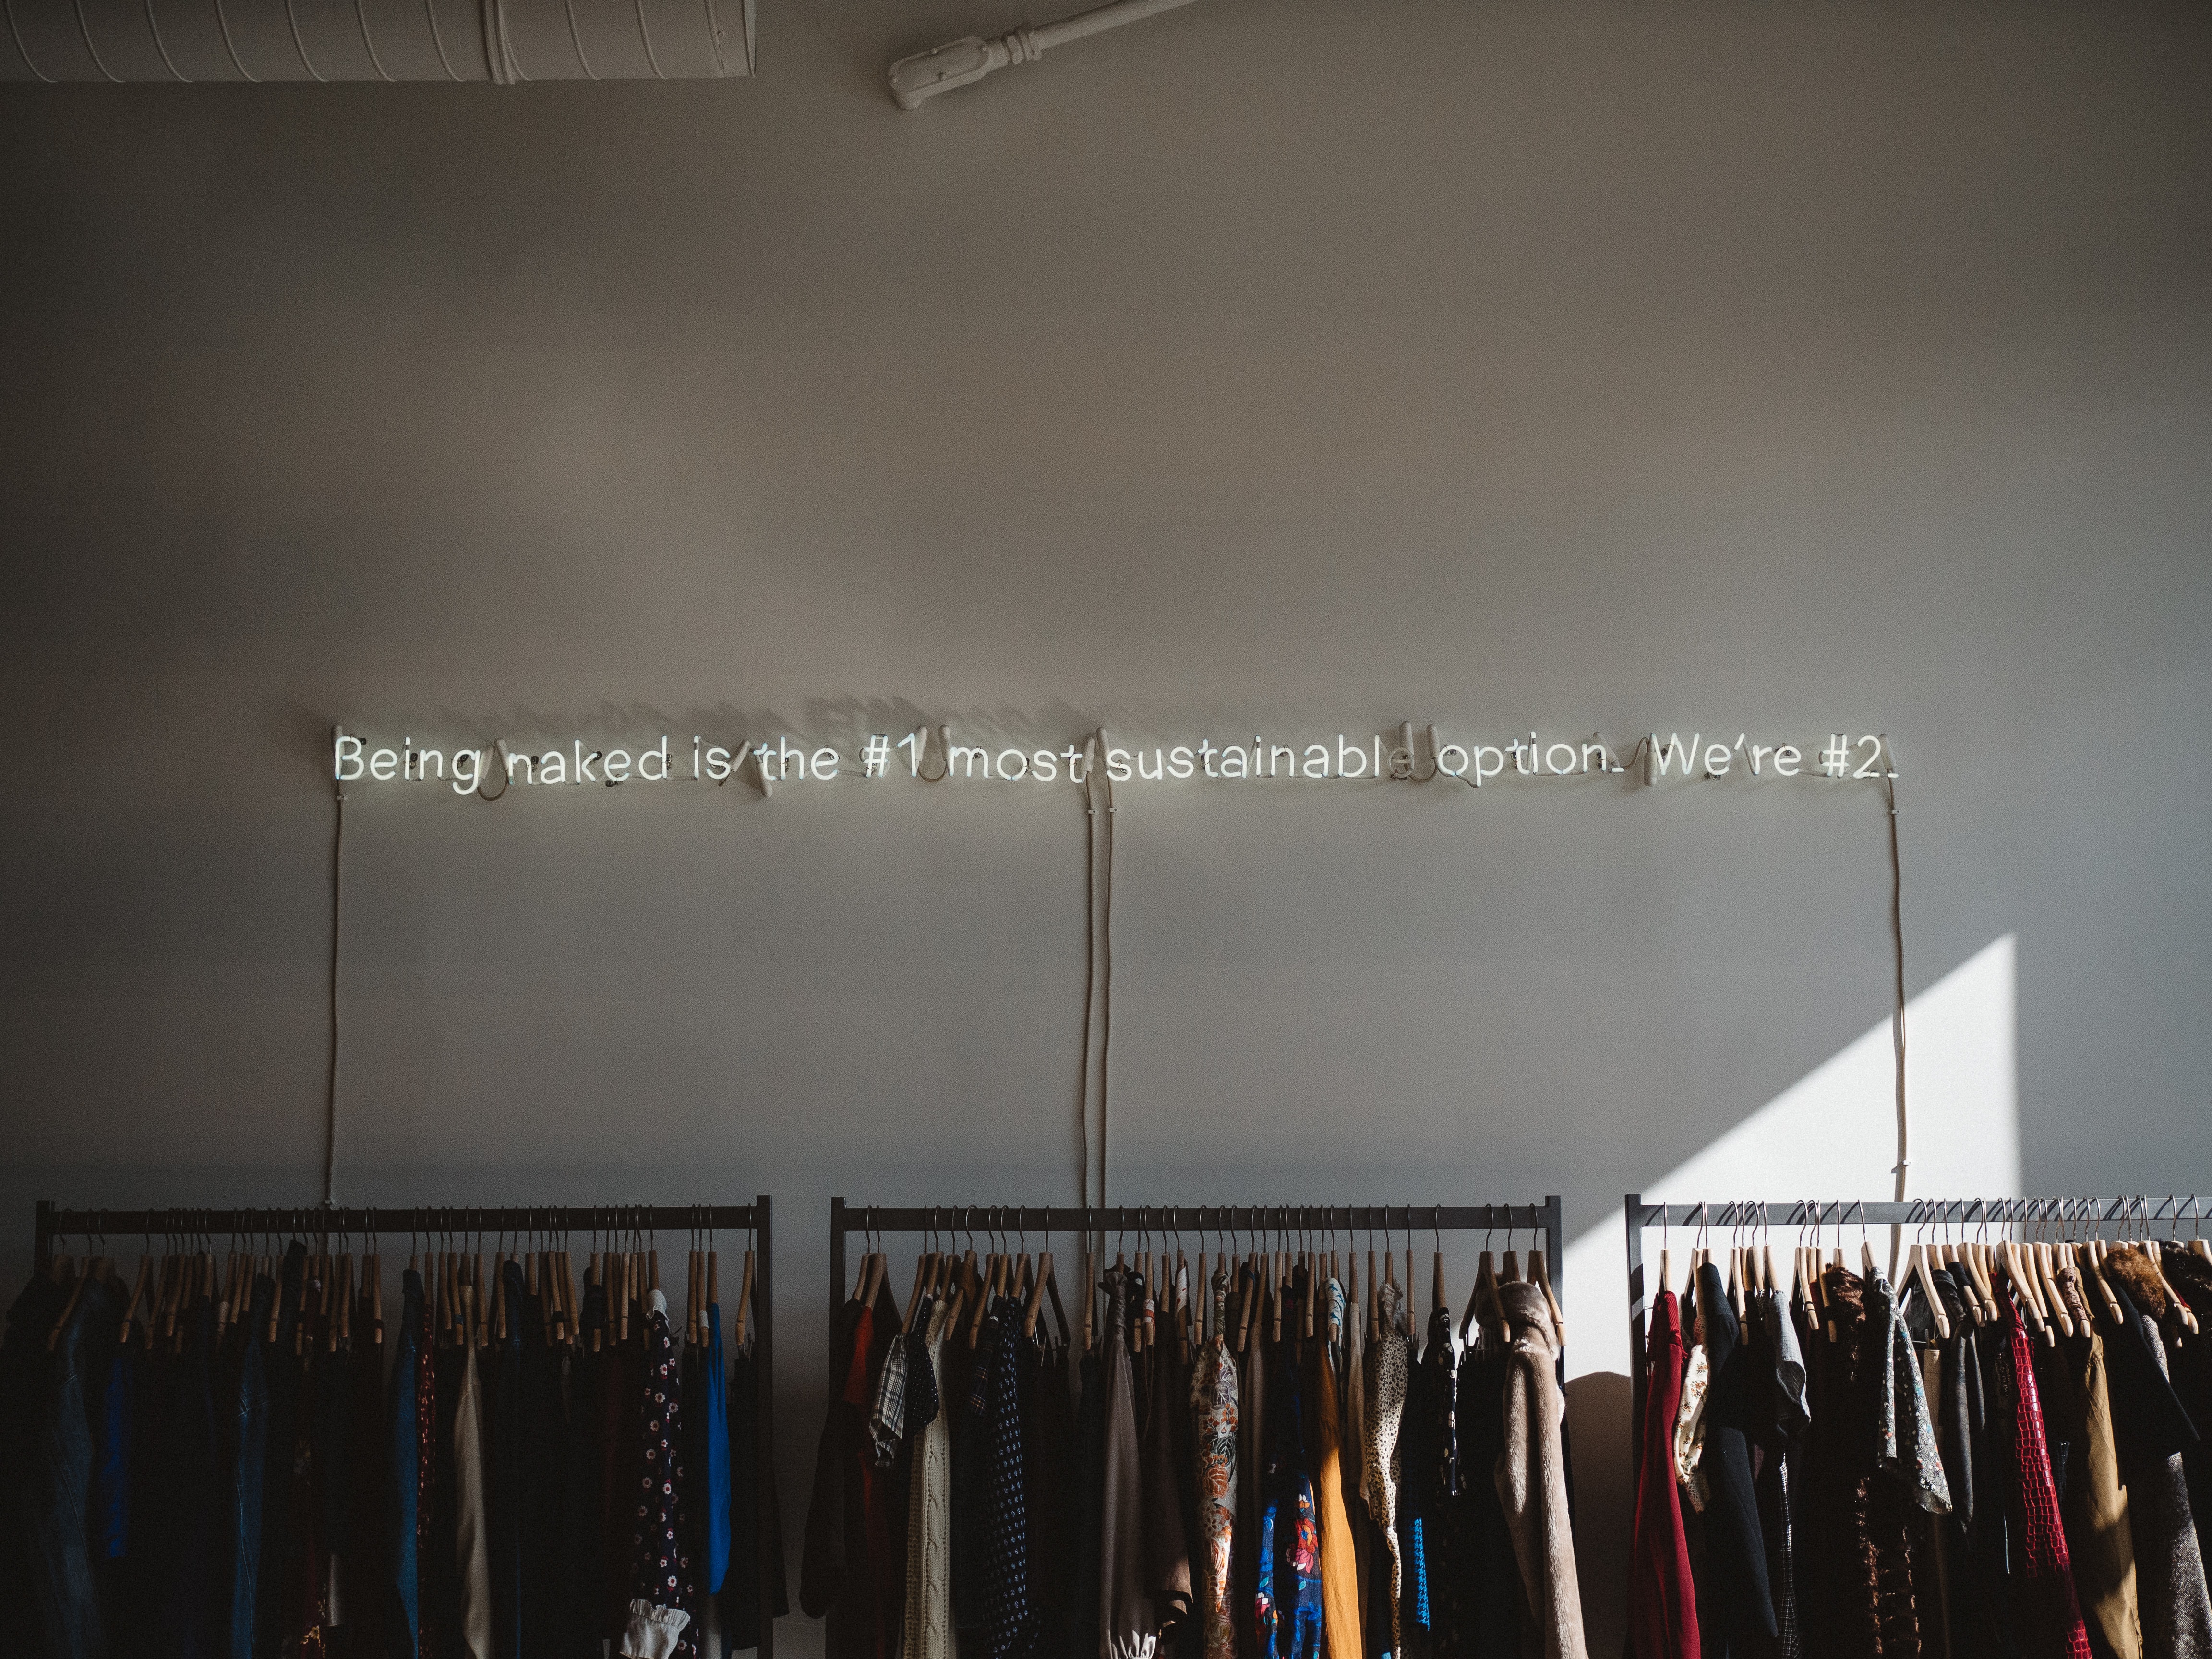 Sustainability in the Fashion Industry: Clothes rack with sign above reading "Being naked is the #1 most sustainable option. We're #2."